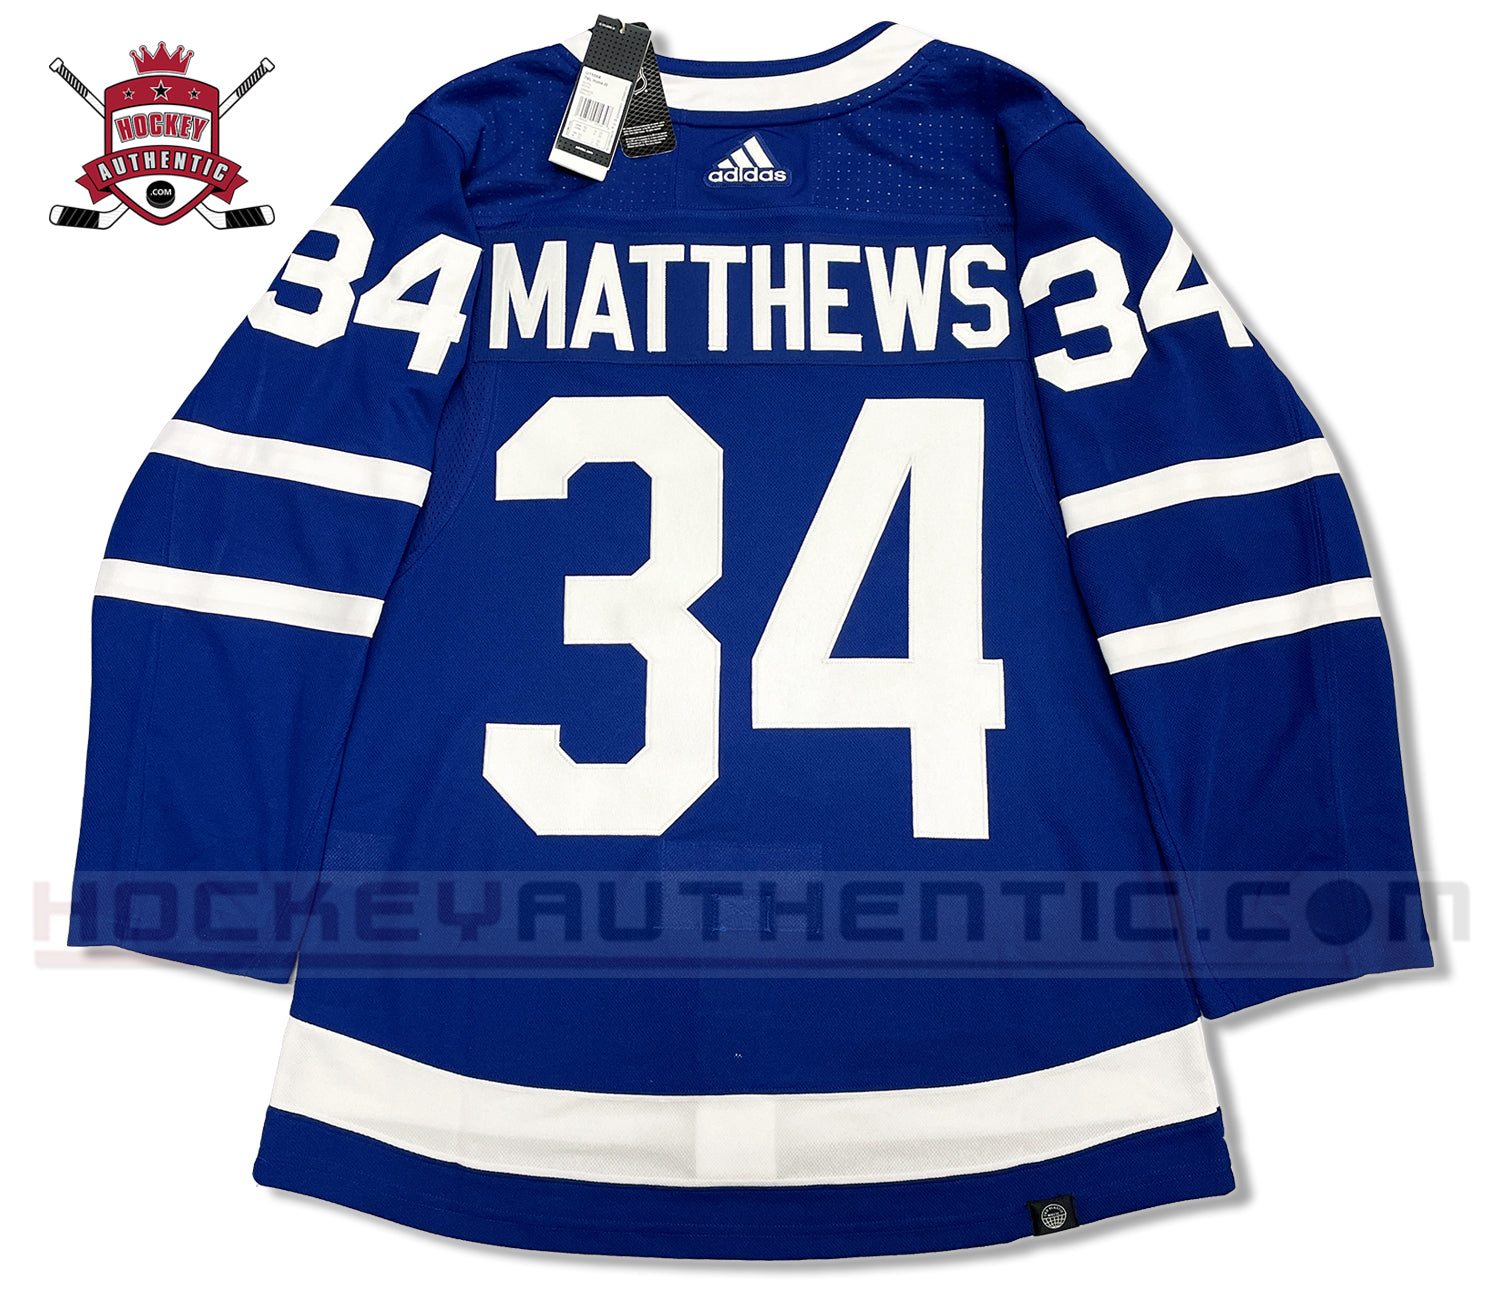 leafs home jersey